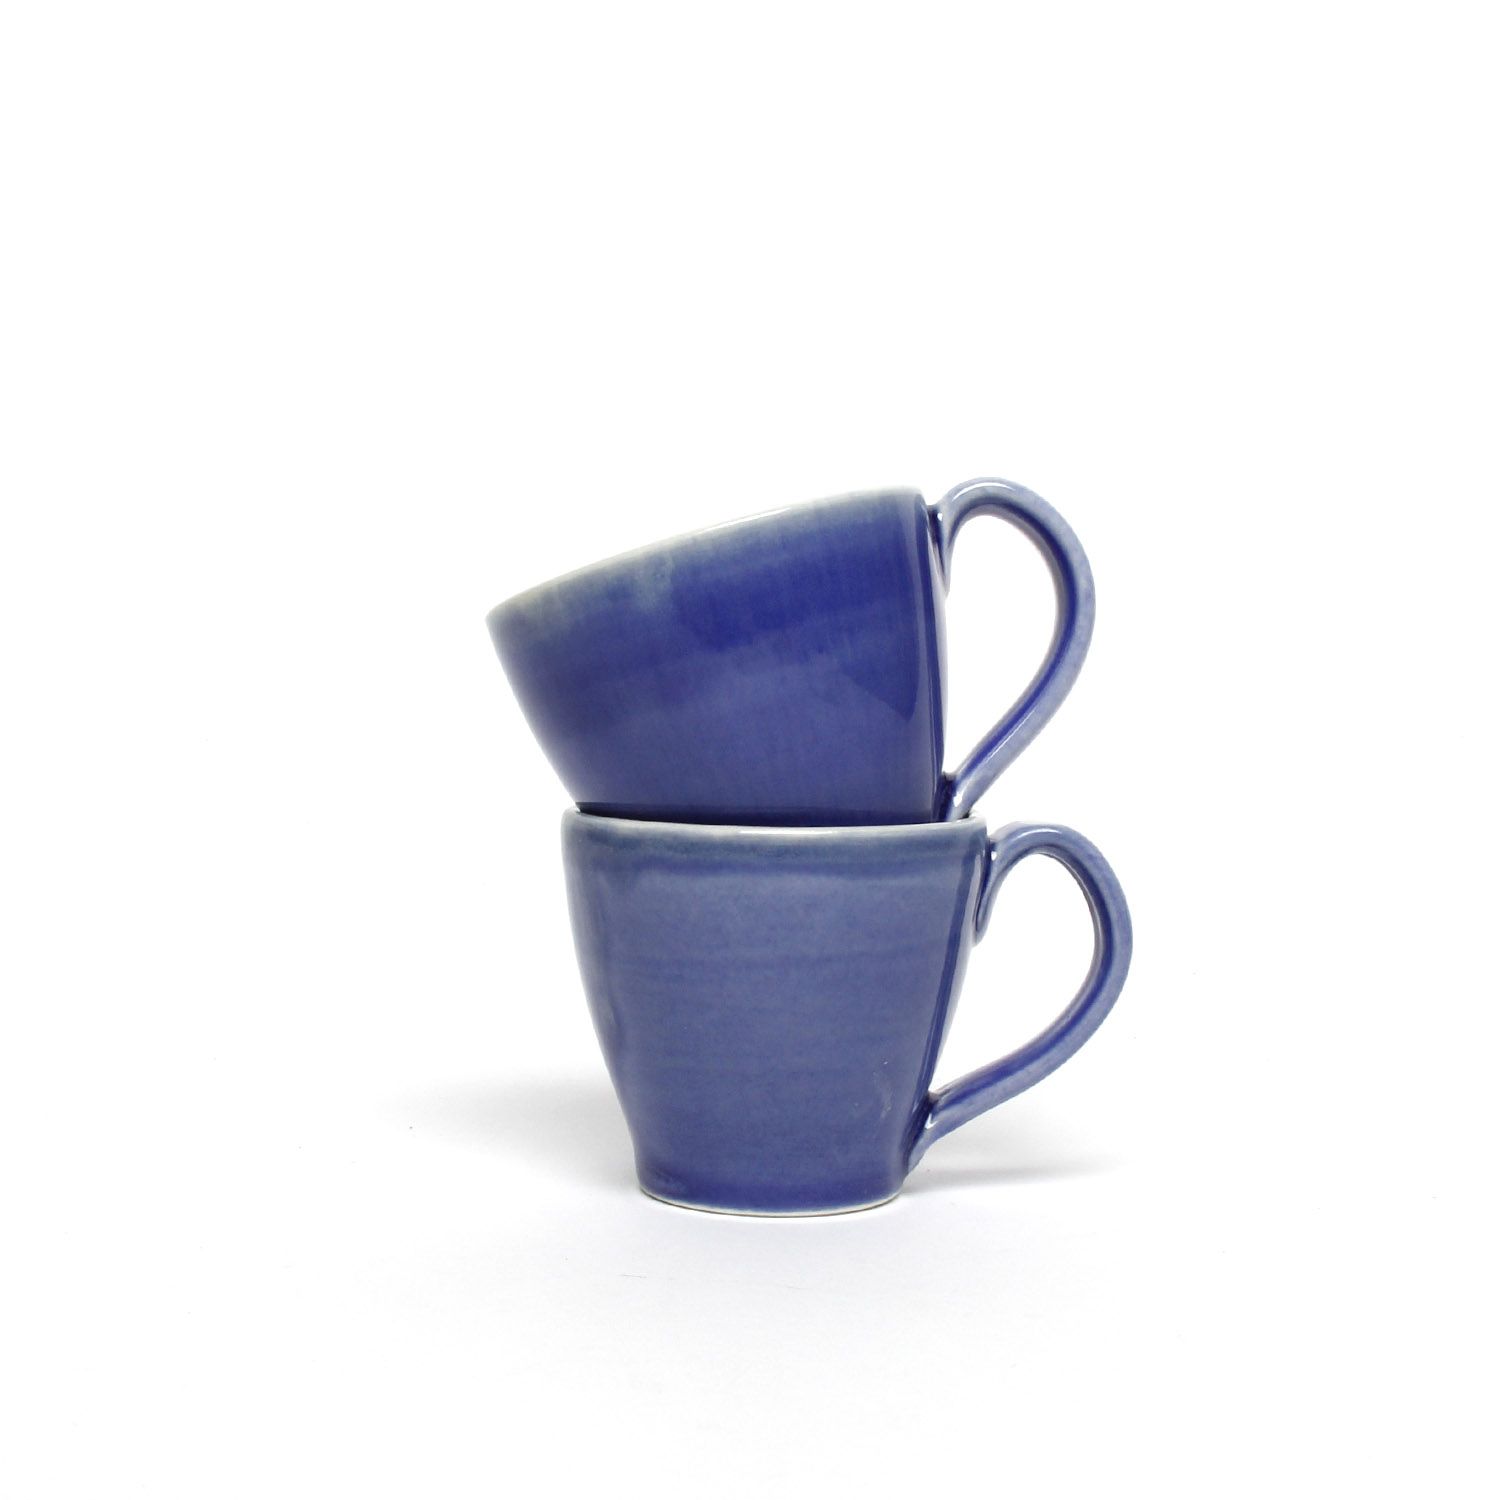 Thomas Aitken: Blue Espresso Cup Product Image 4 of 5